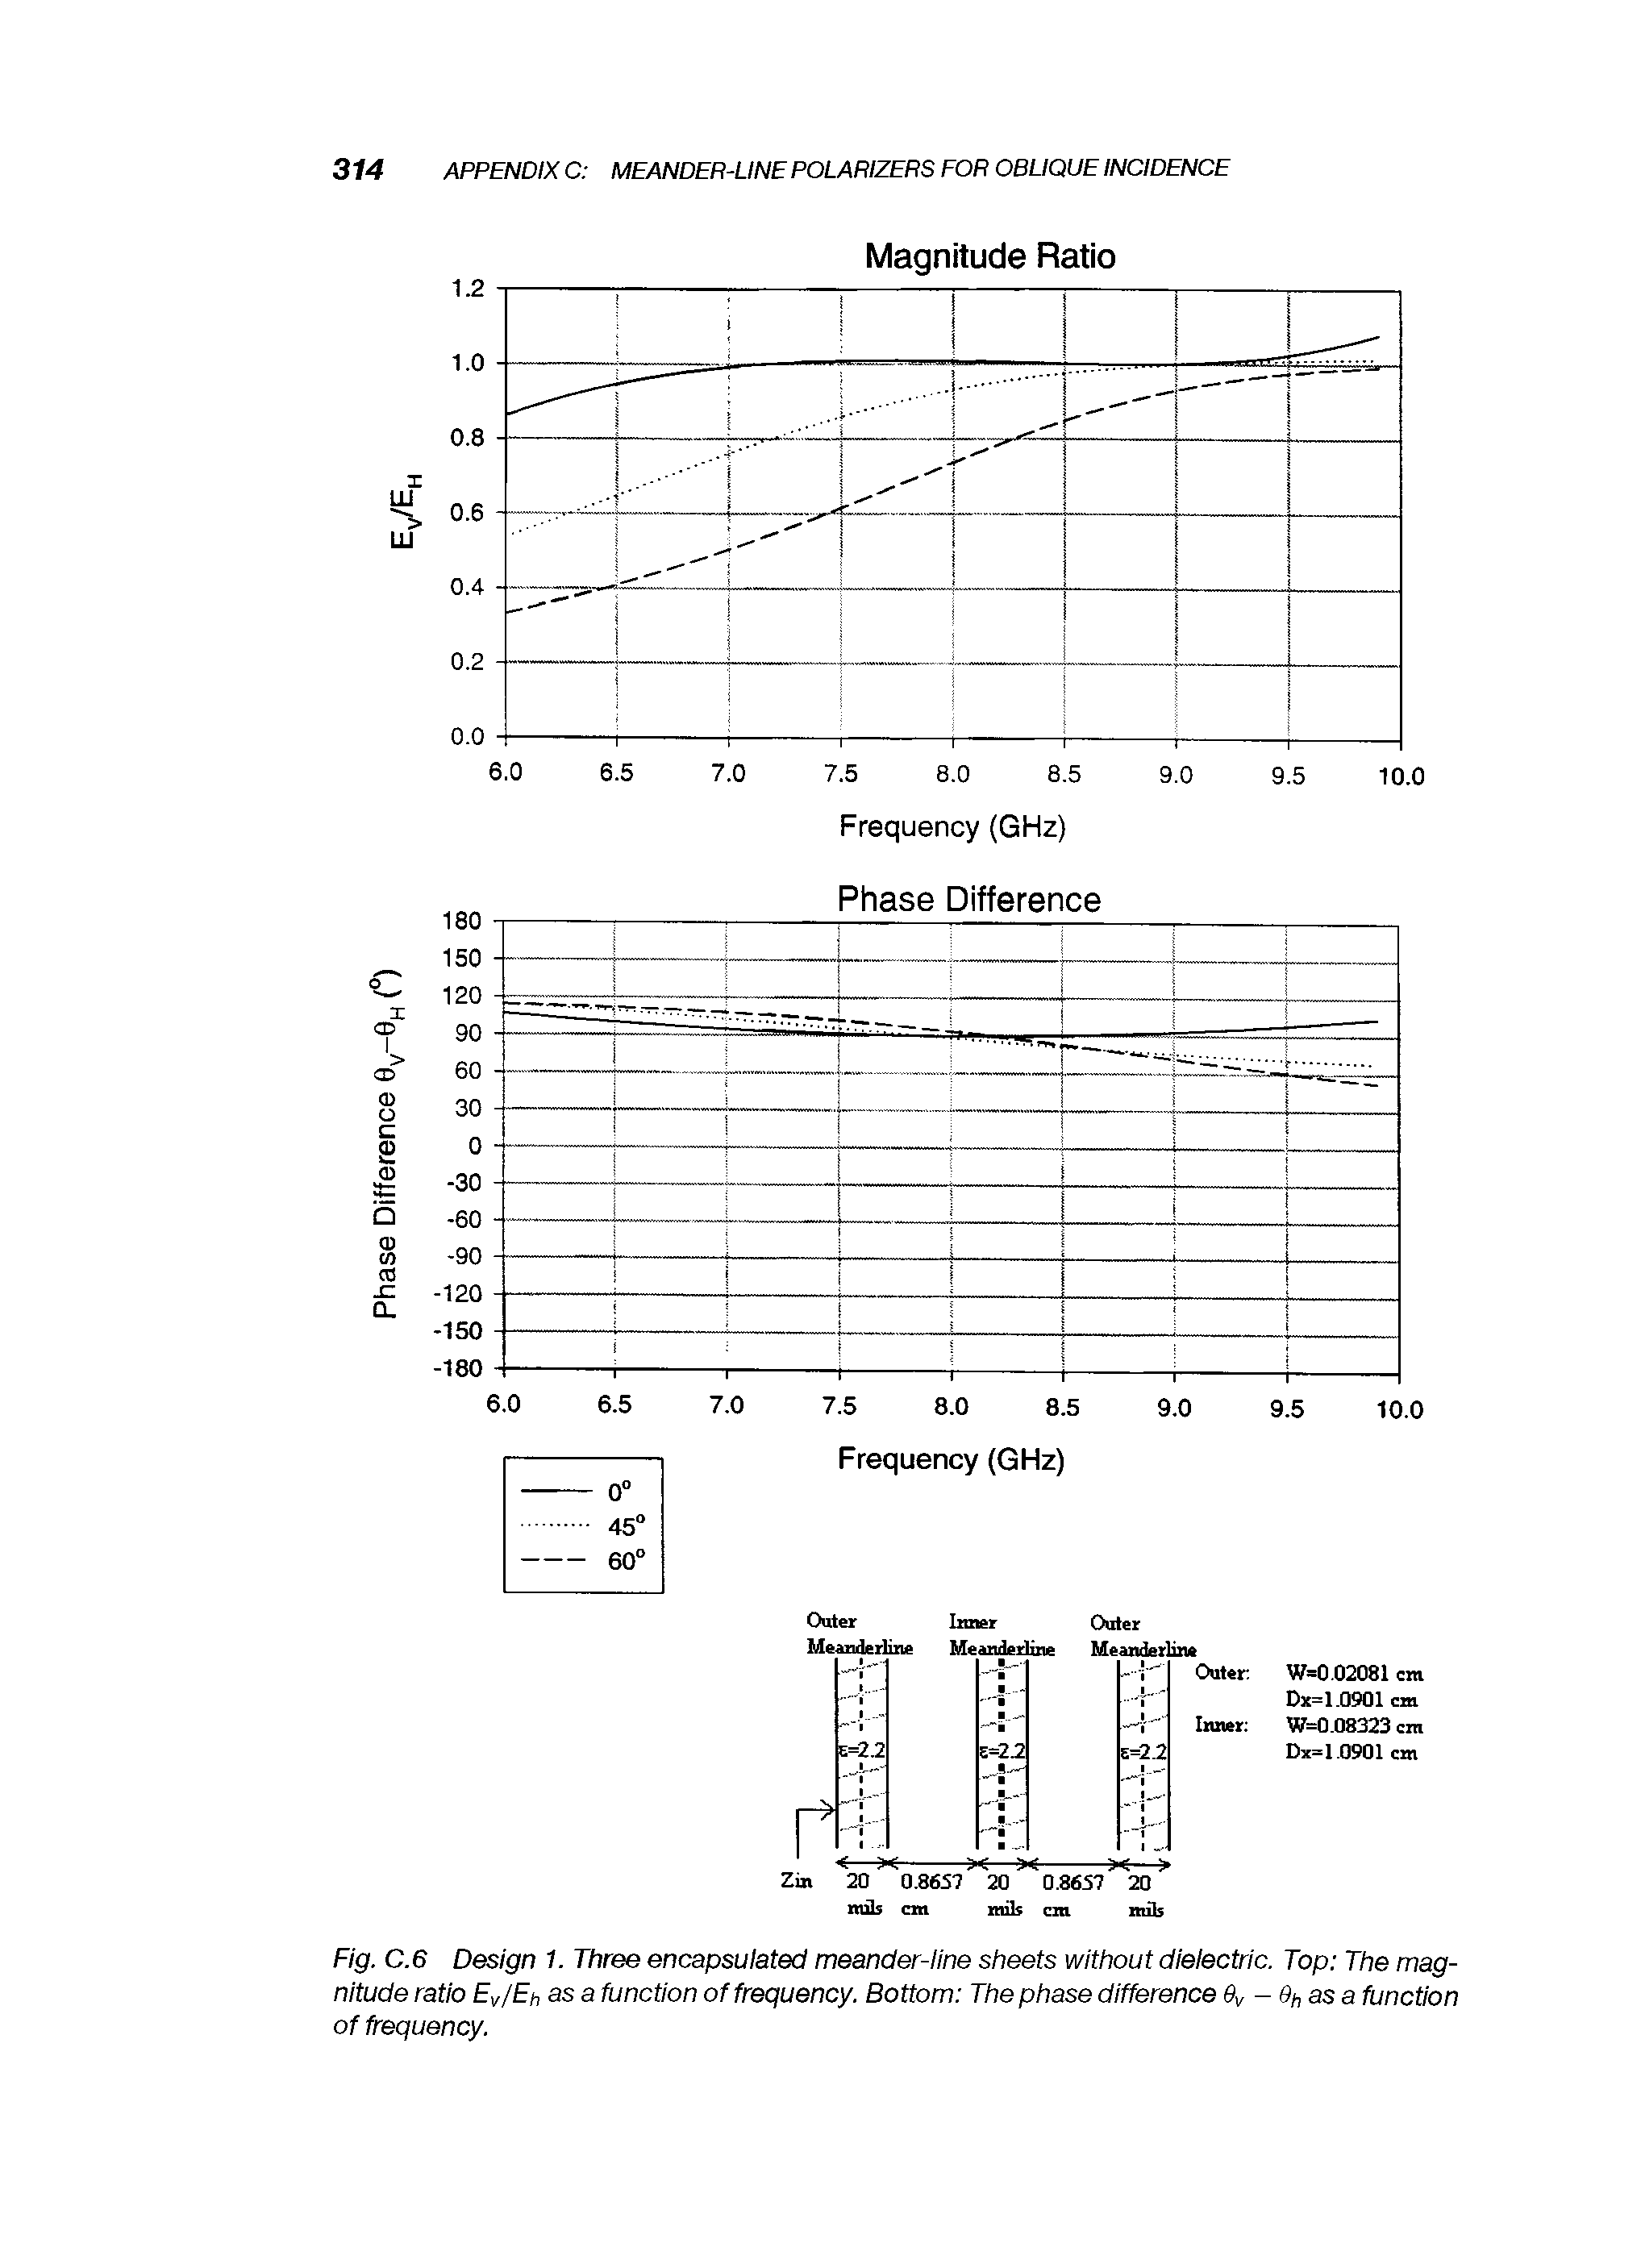 Fig. C.6 Design 1. Three encapsulated meander-line sheets without dielectric. Top The magnitude ratio Ev/Eh as a function of frequency. Bottom The phase difference Qy -9f,asa function of frequency.